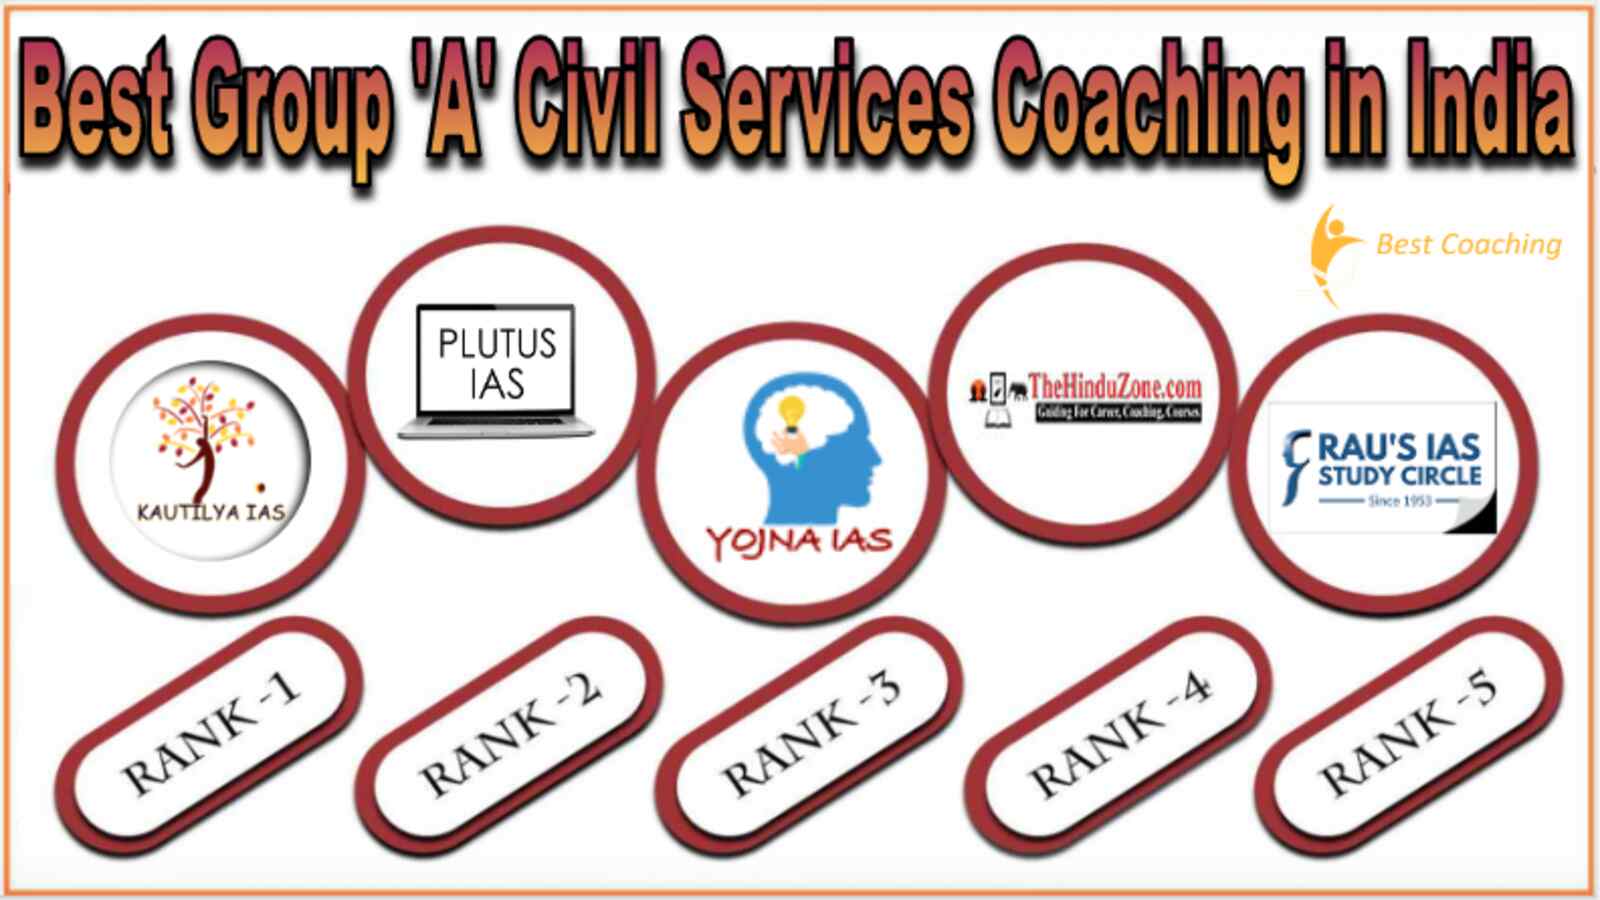 Best Group 'A' Civil Services Coaching in India